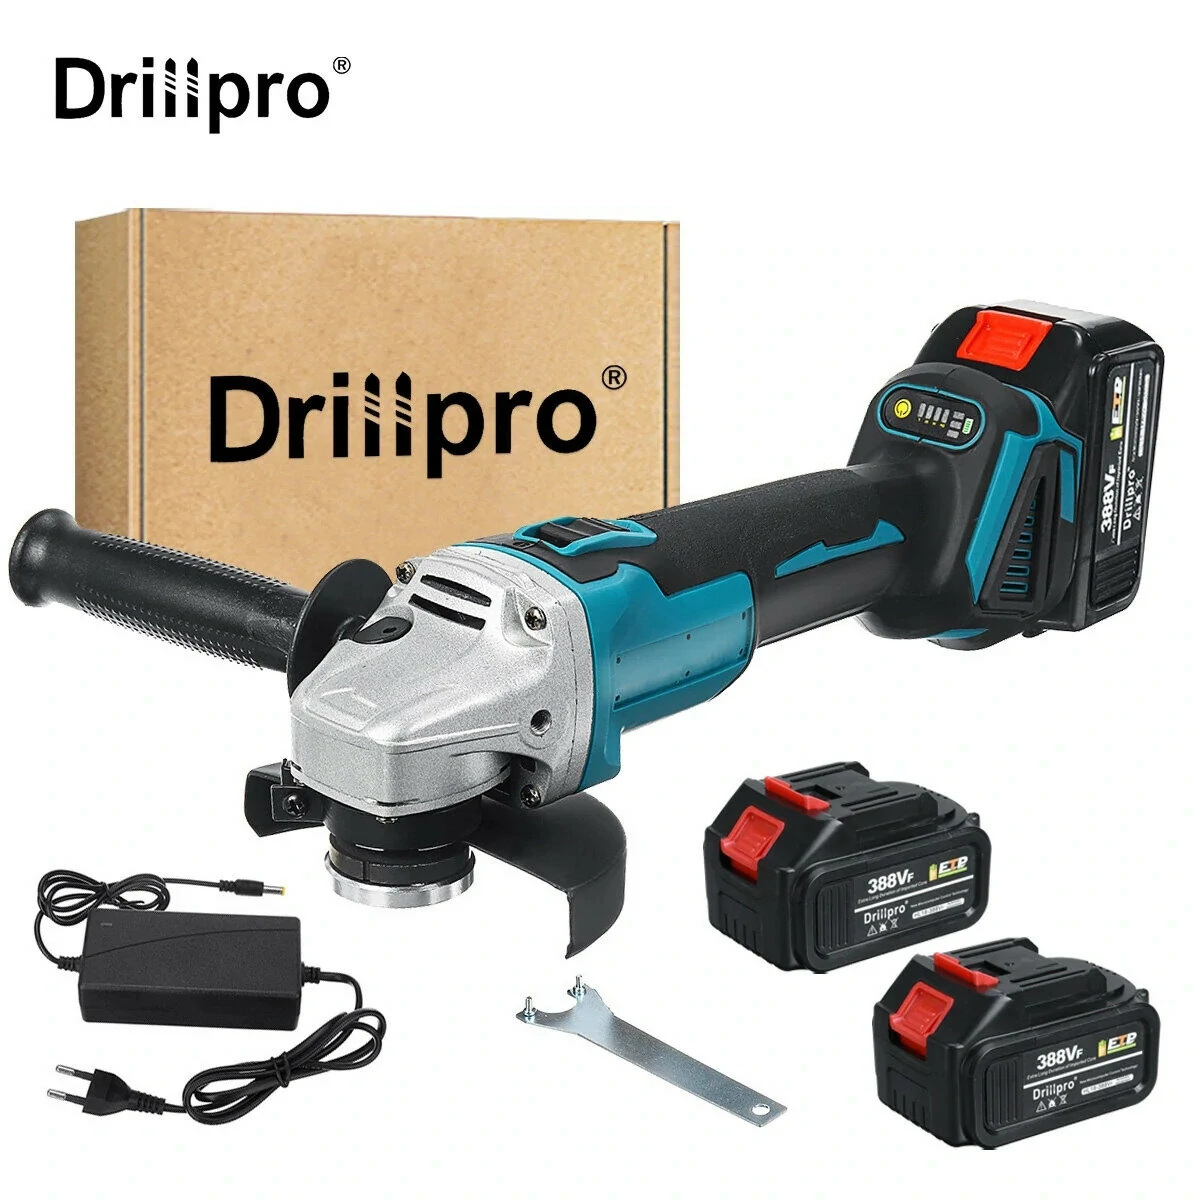 Drillpro 125mm Blue+Black Brushless Angle Grinder Rechargeable Adjustable Speed Angle Grinder With Battery - One Battery